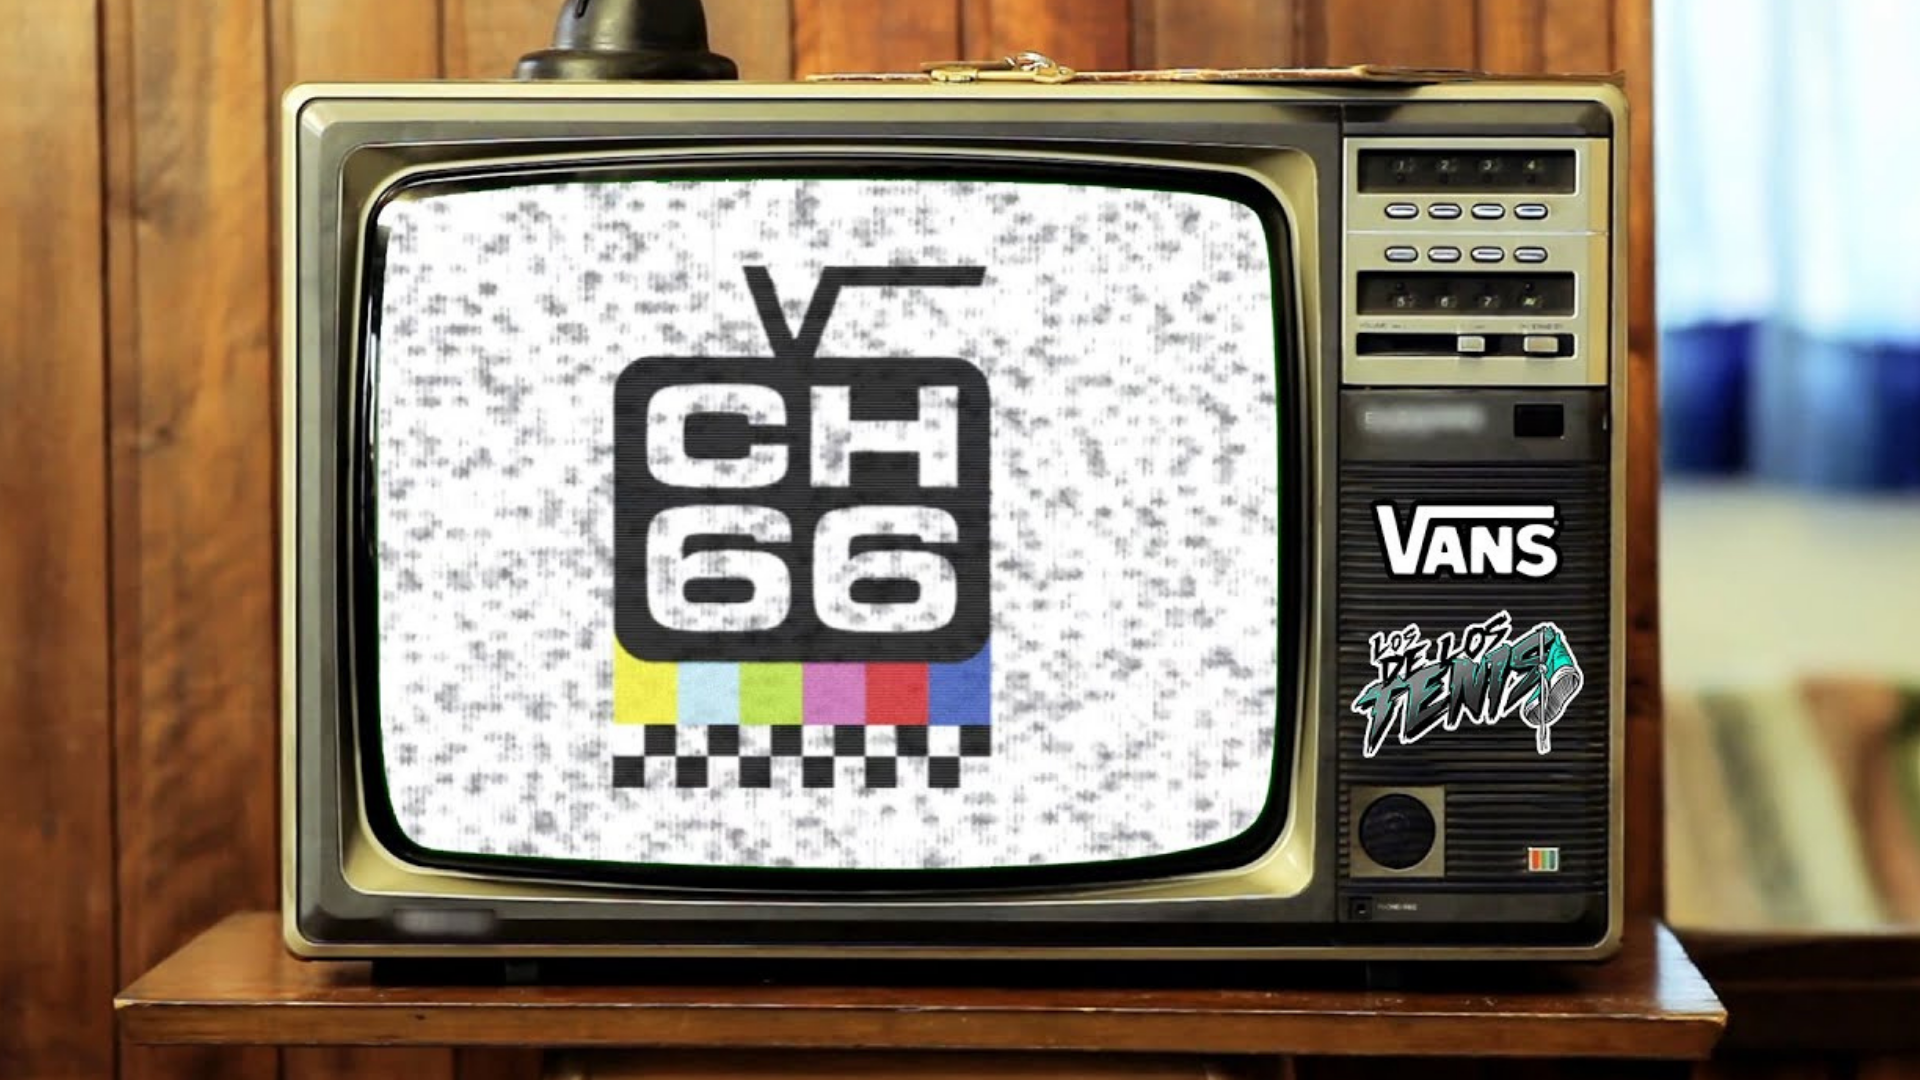 Channel 66 by Vans